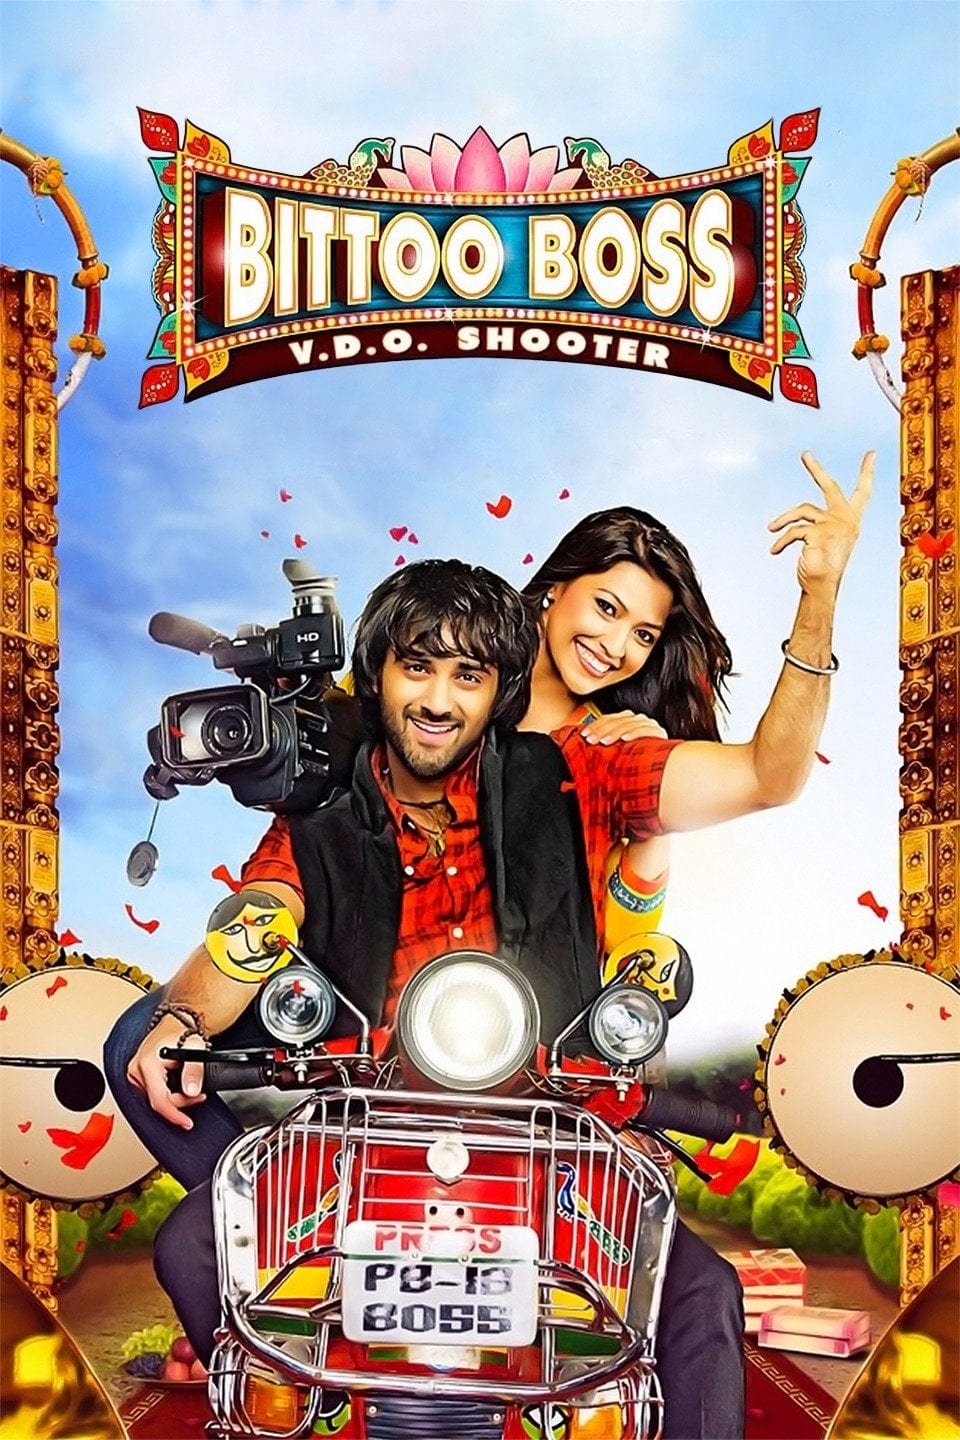 Poster for the movie "Bittoo Boss"